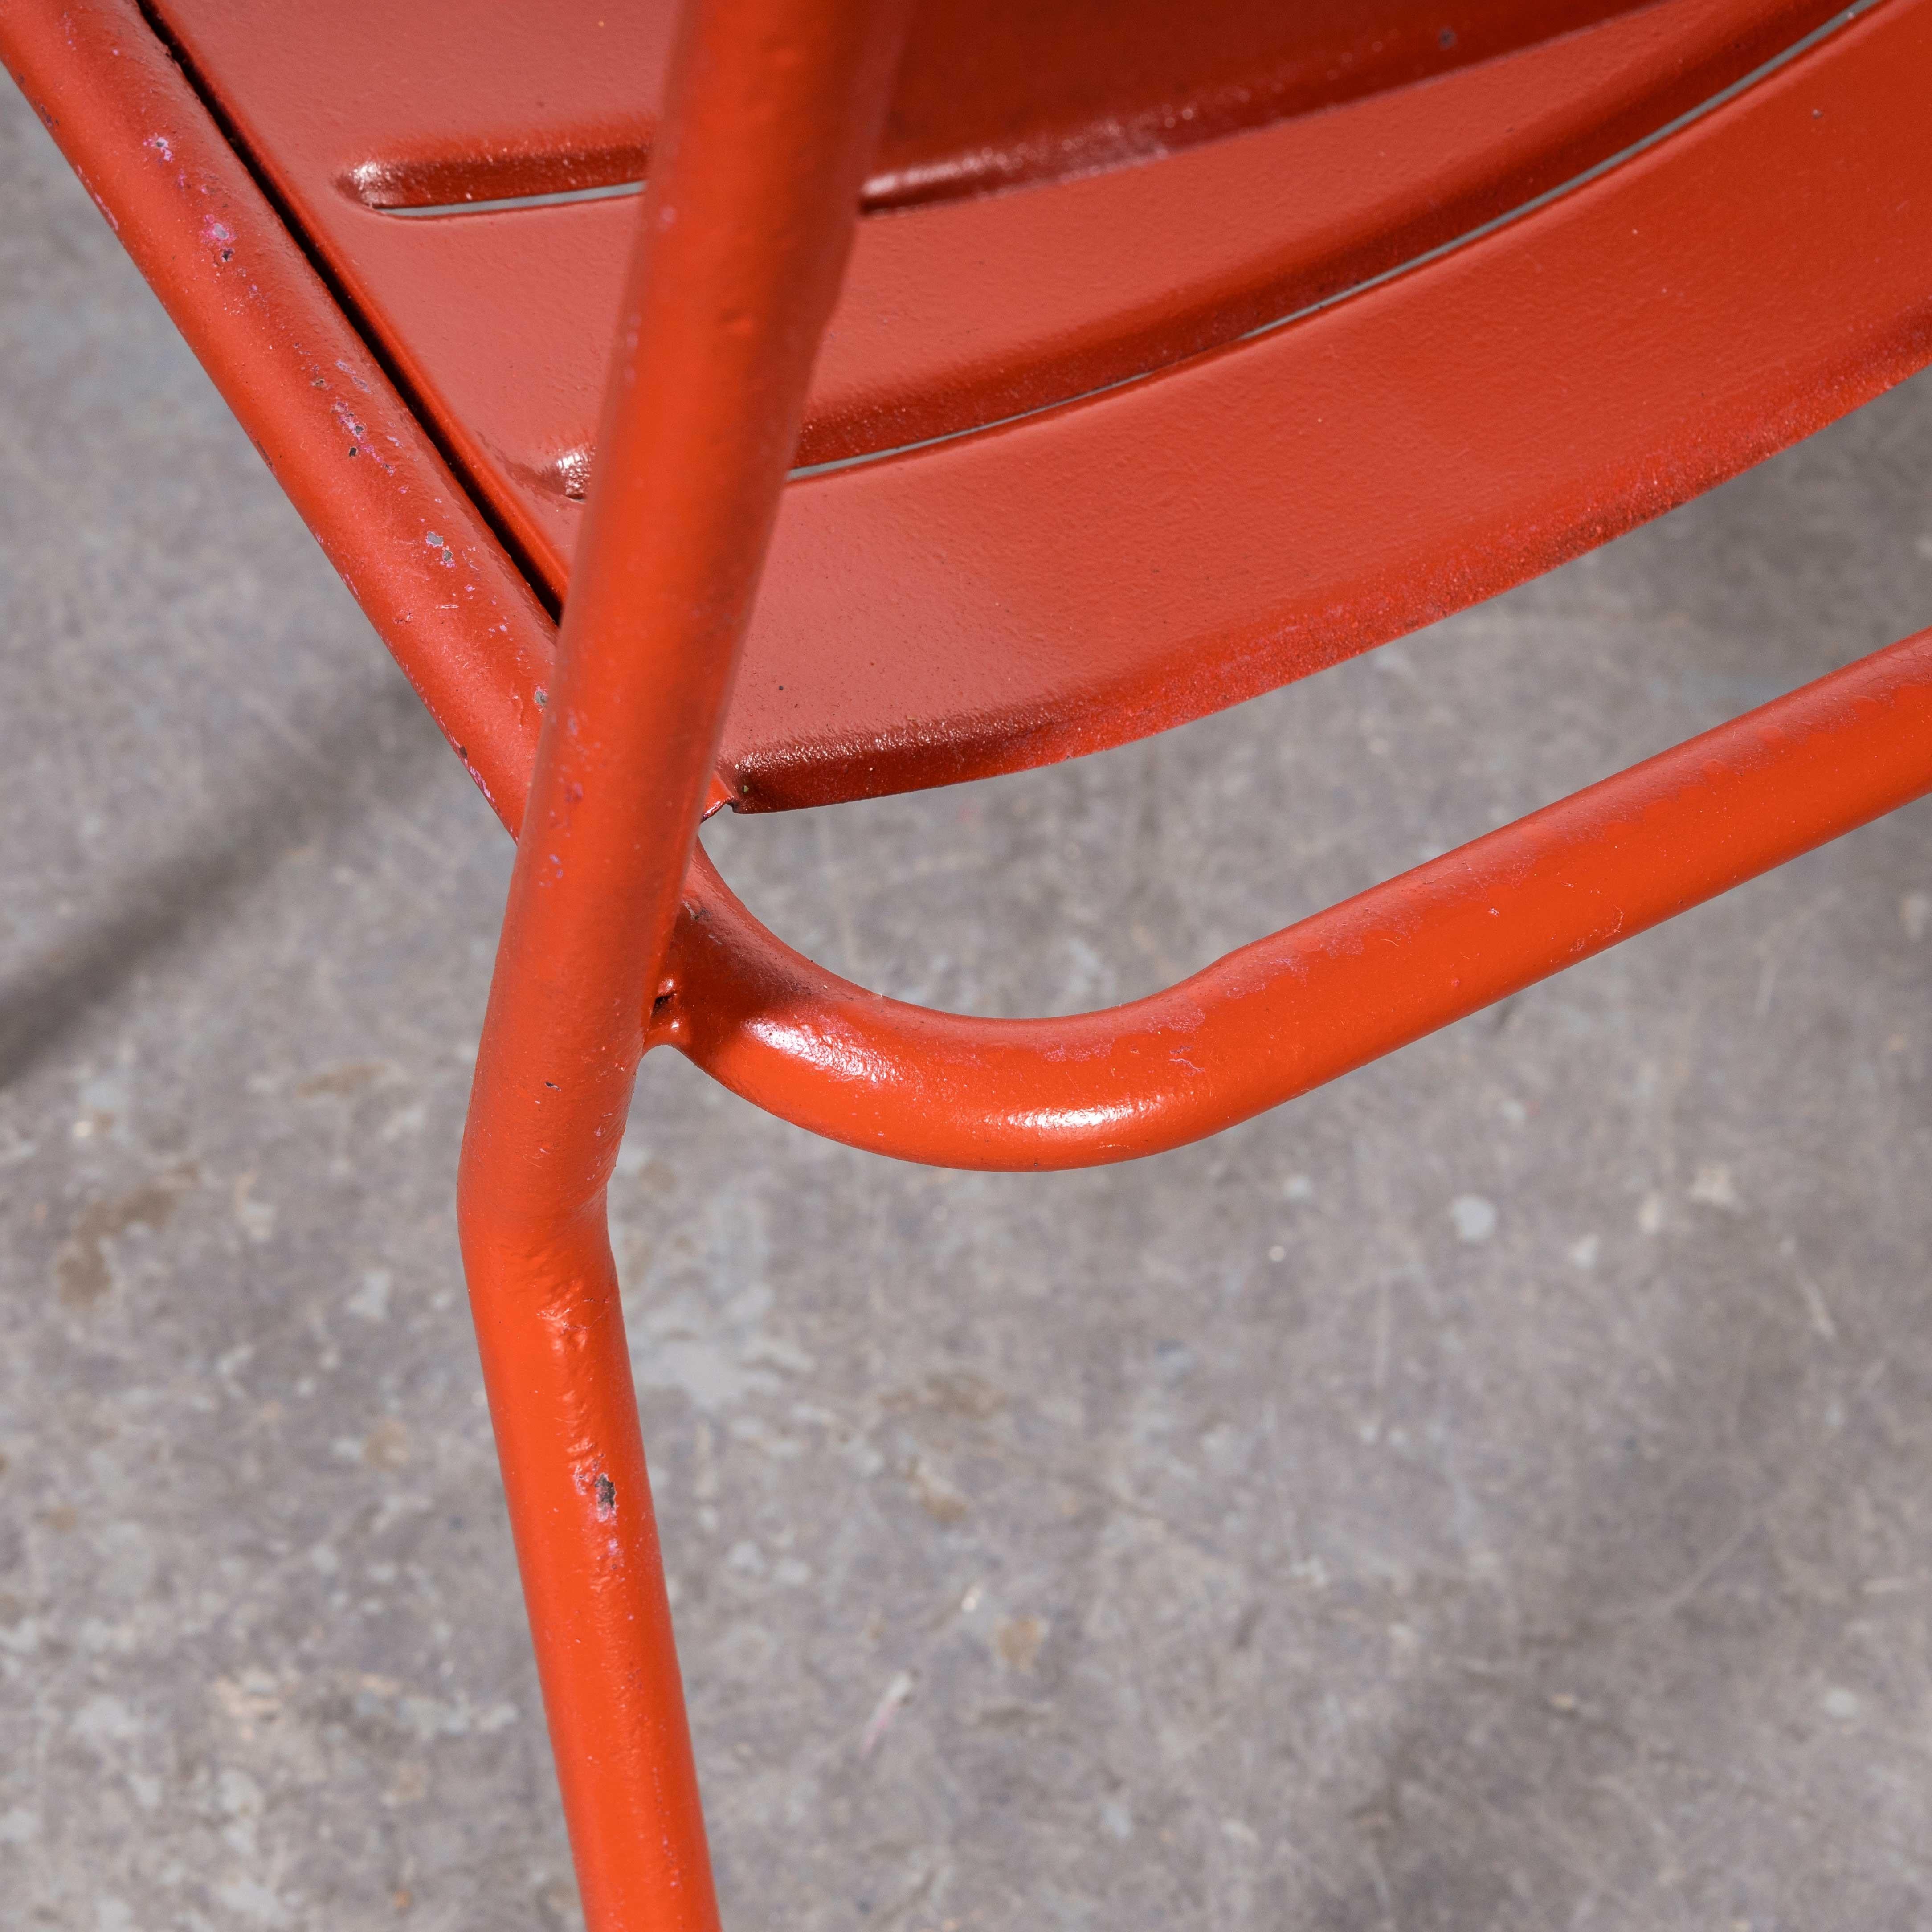 1950’s French red metal outdoor dining chairs – set of six.
1950’s French red metal outdoor dining chairs – set of six. Similar to Tolix but not made by Tolix, these chairs were industrially produced in France in the fifties. Good strong original